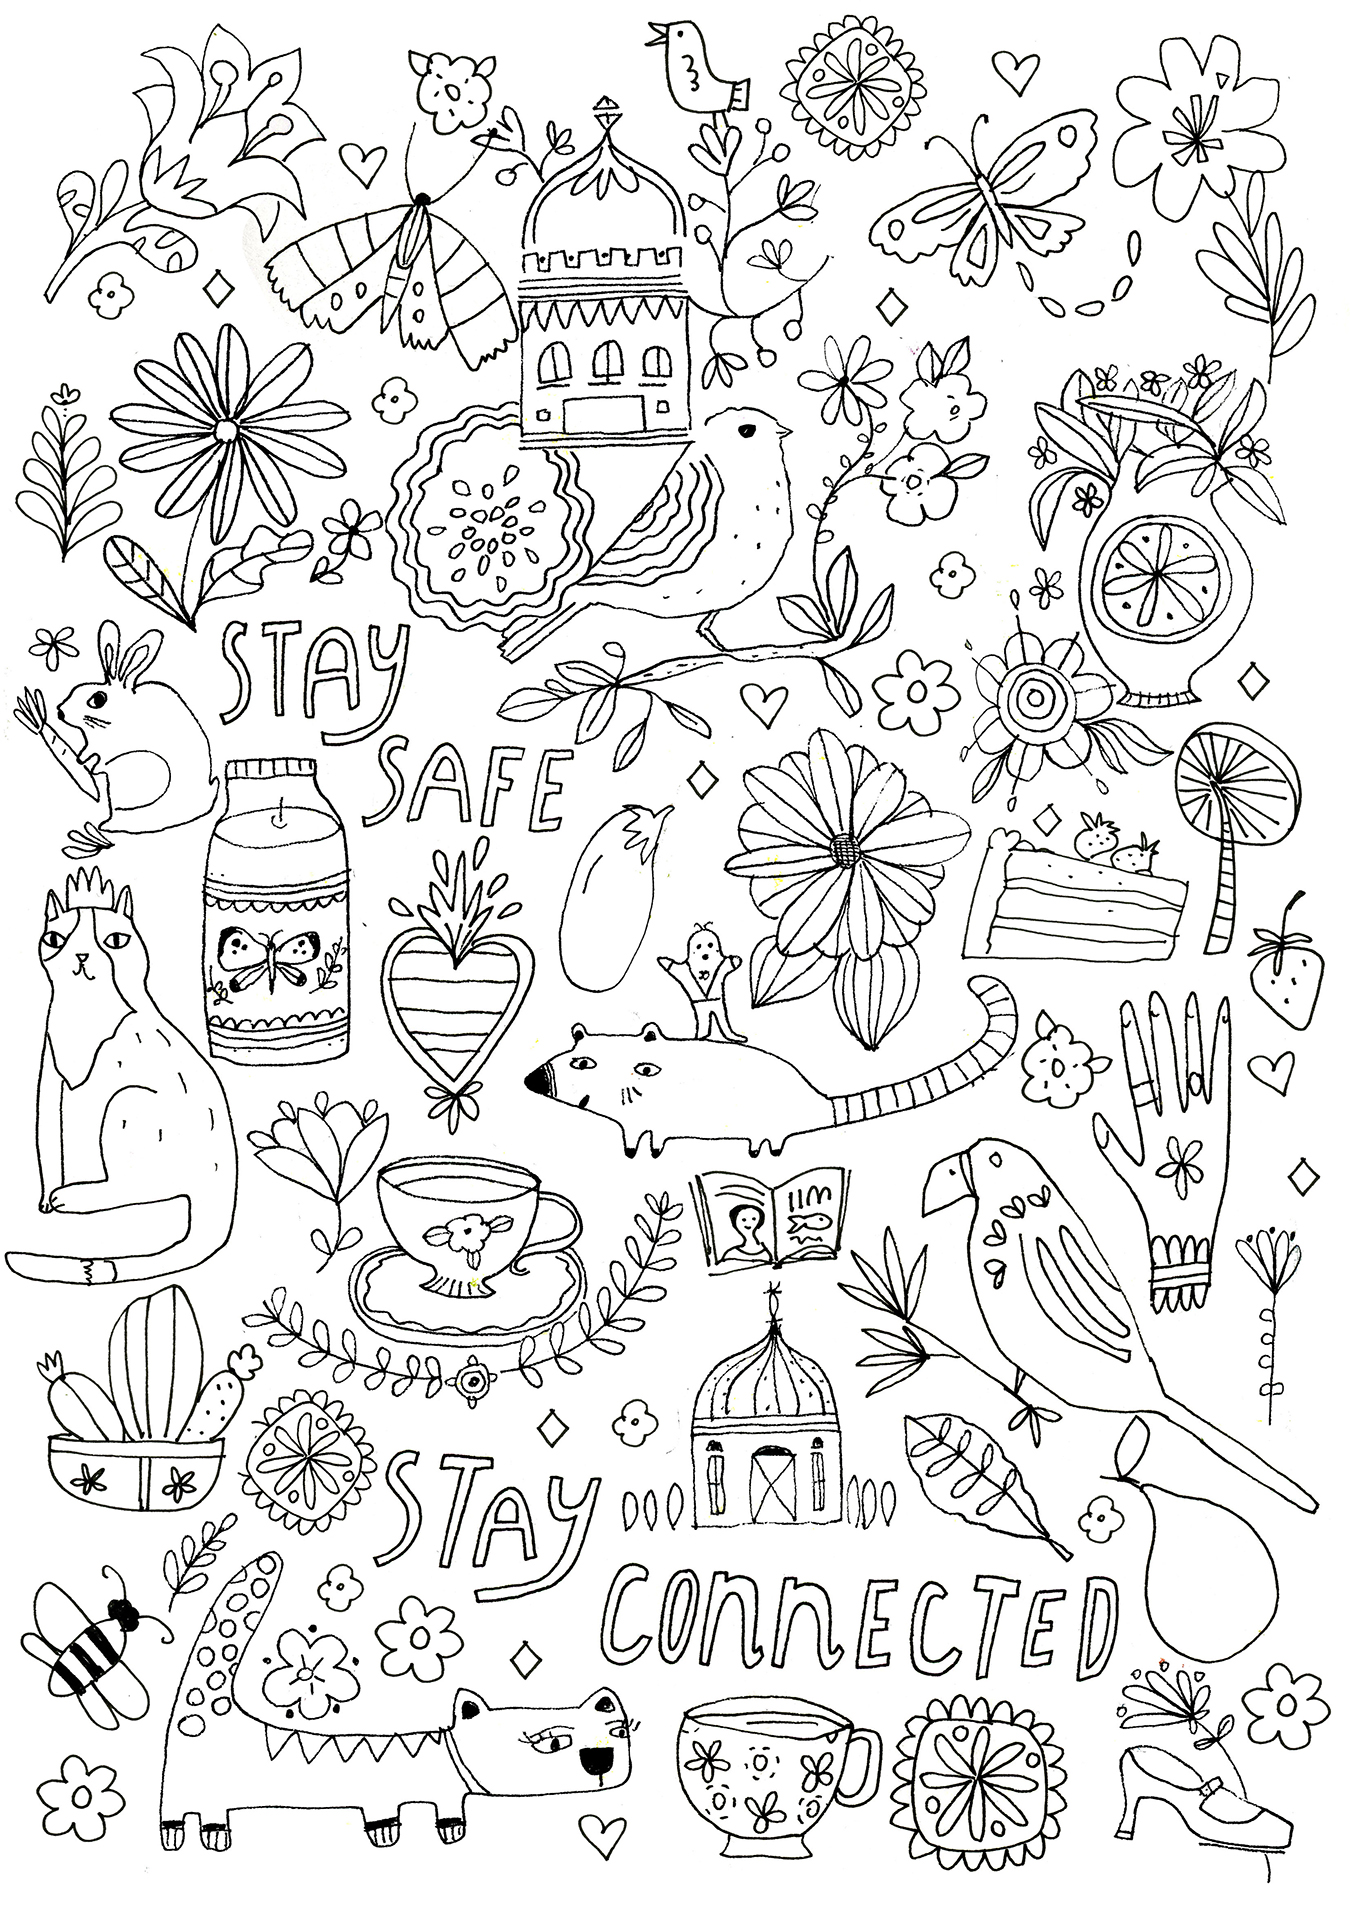 coloring page - staysafe.stayconnected Jennifer Orkin Lewis - Flow Magazine